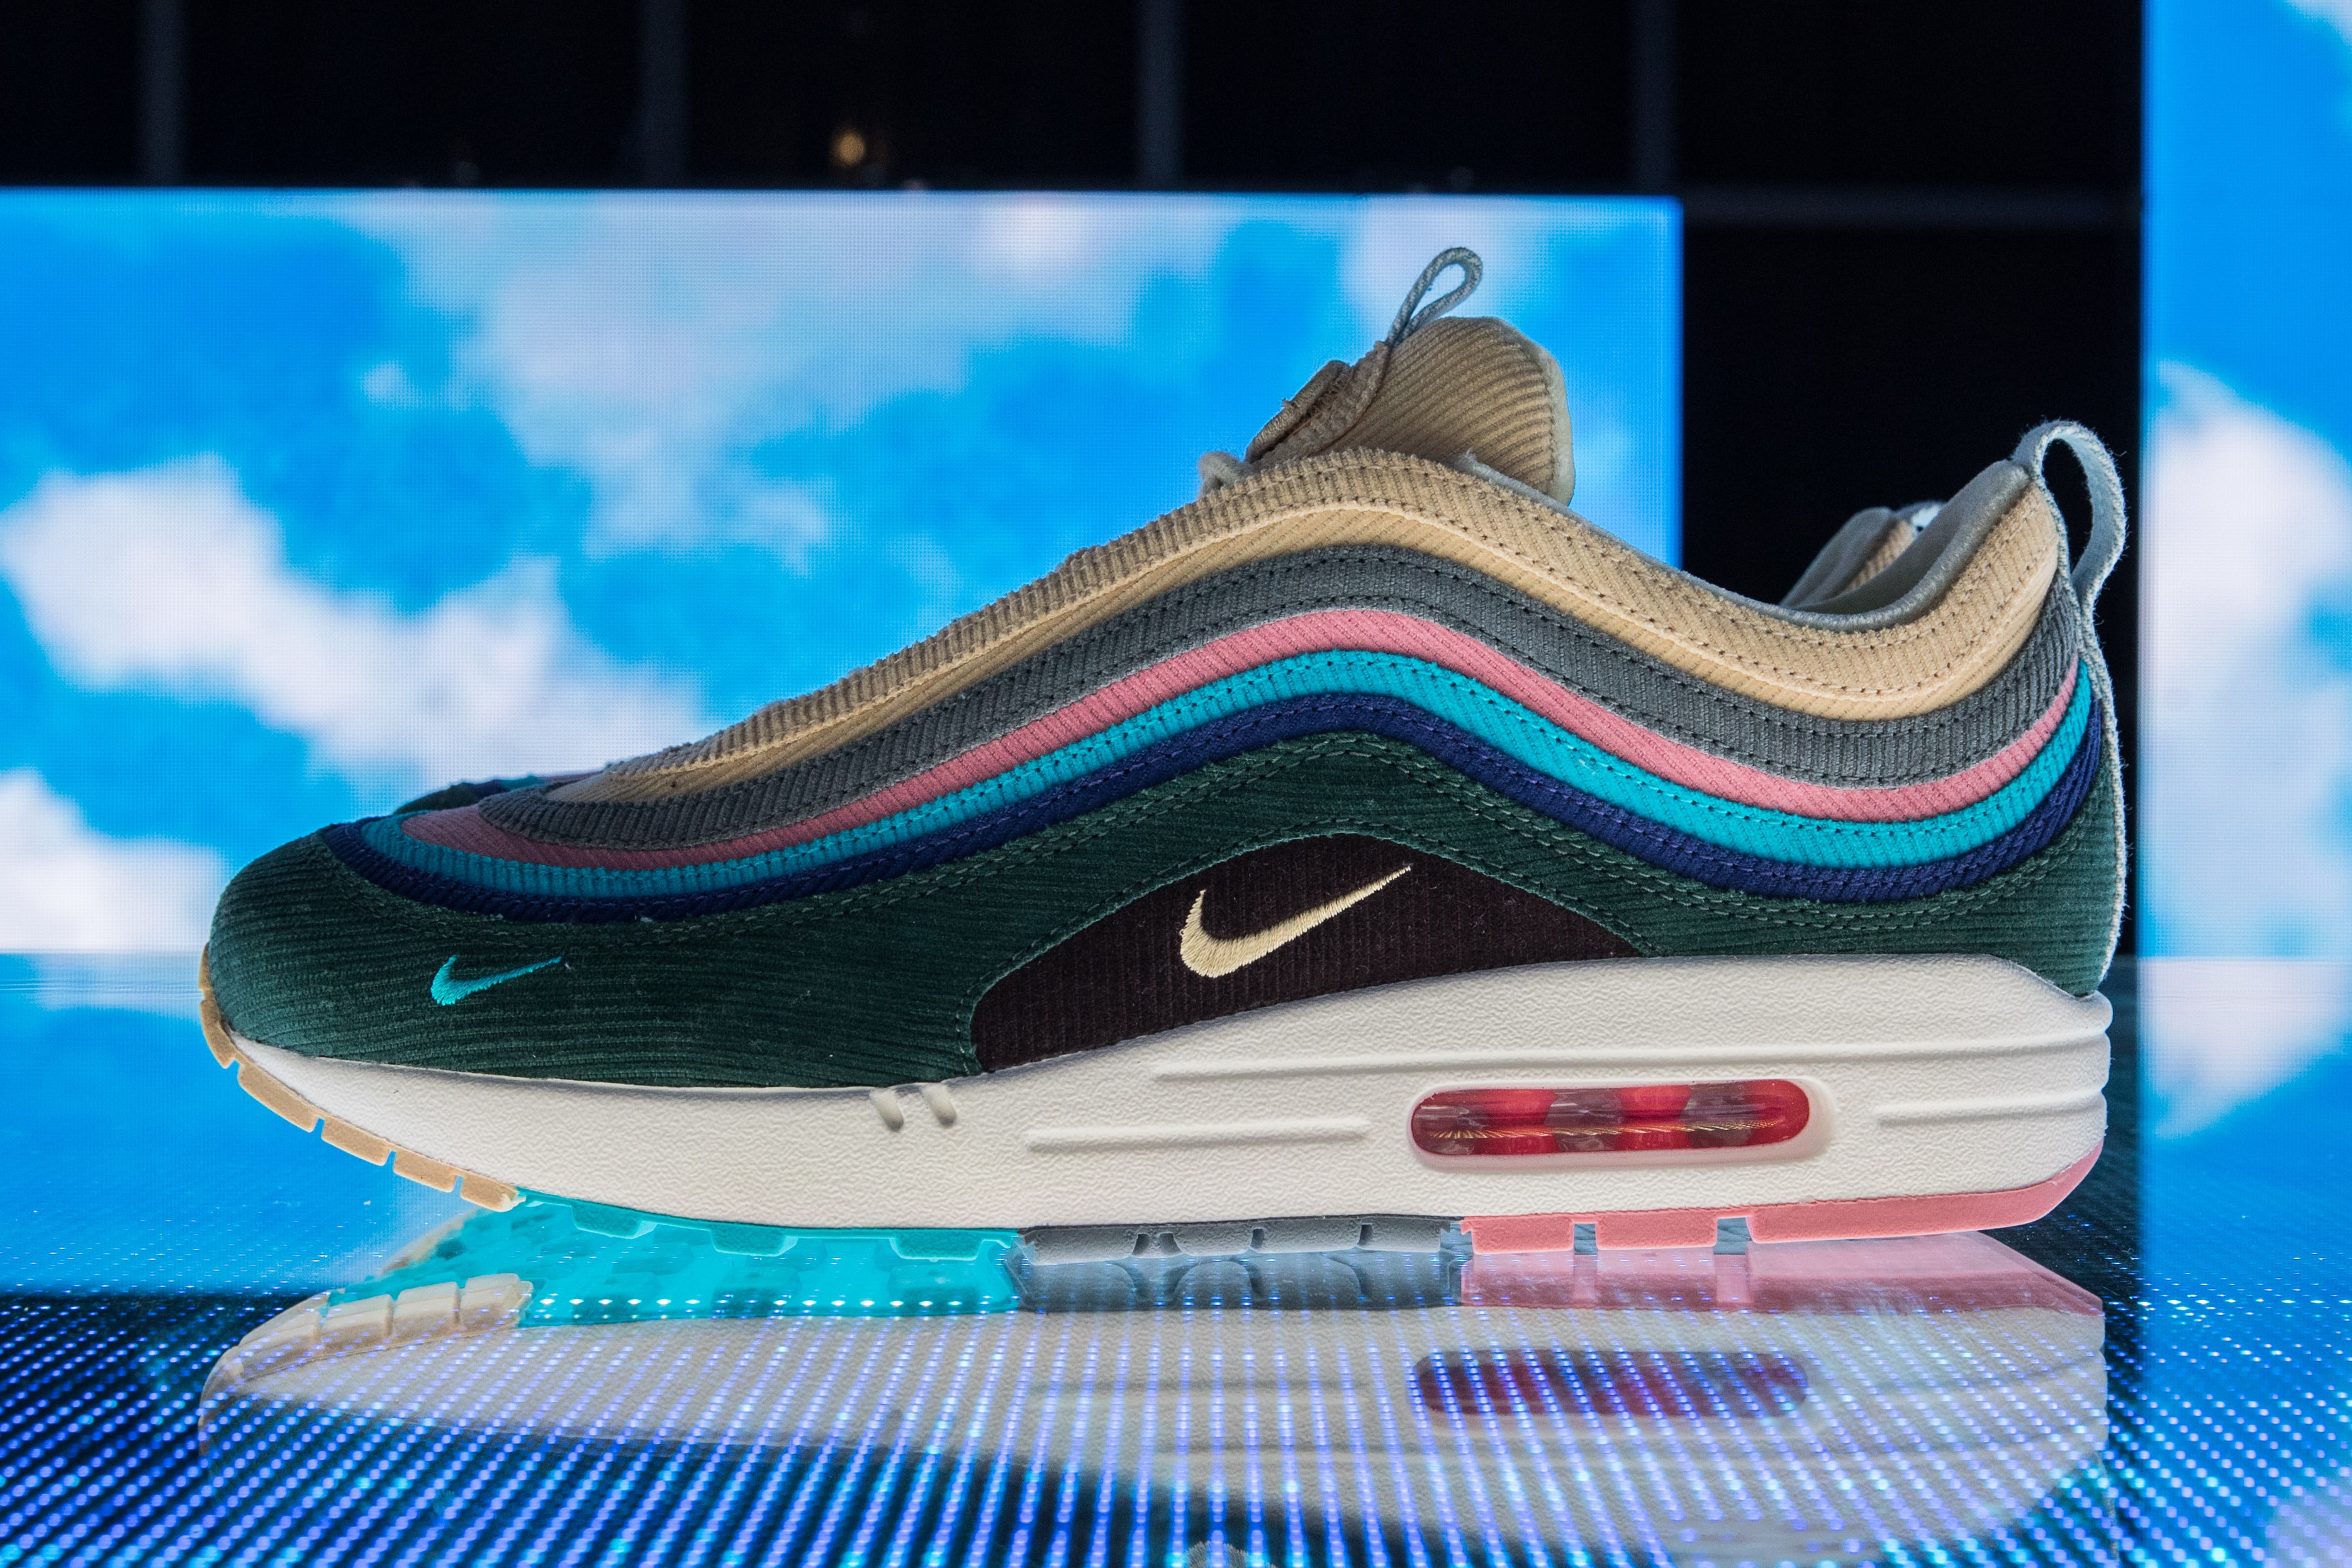 Nike Air Max Day Preview Event in Shanghai Miniswoosh Alexandra Hackett VaporMax 95 97 Sneaker Display Release Virgil Abloh Off-White Collaboration